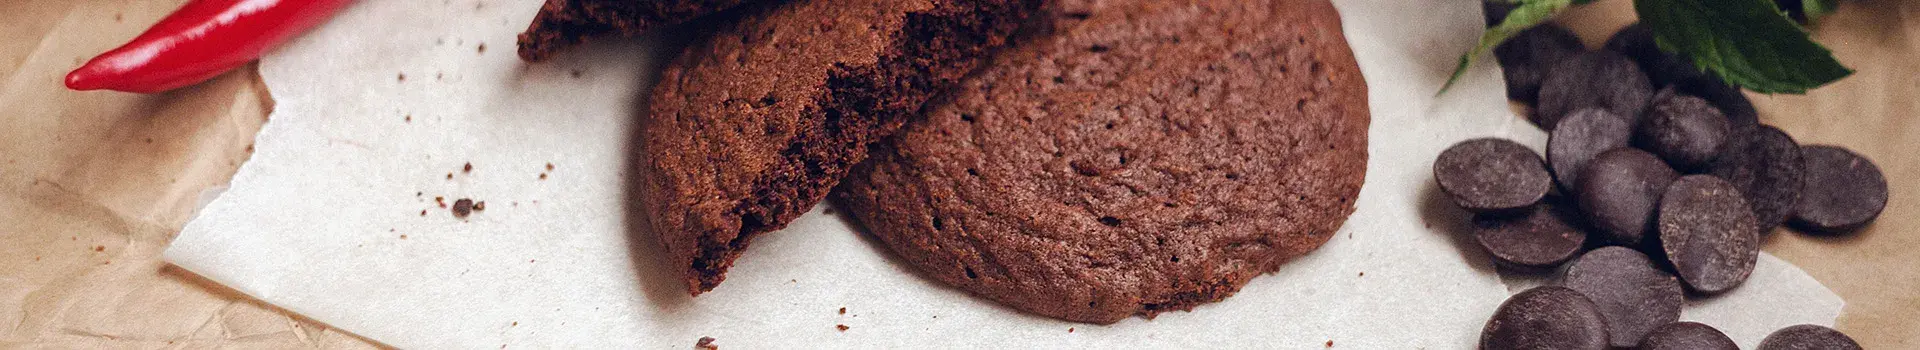 Chilli Chocolate Biscuits